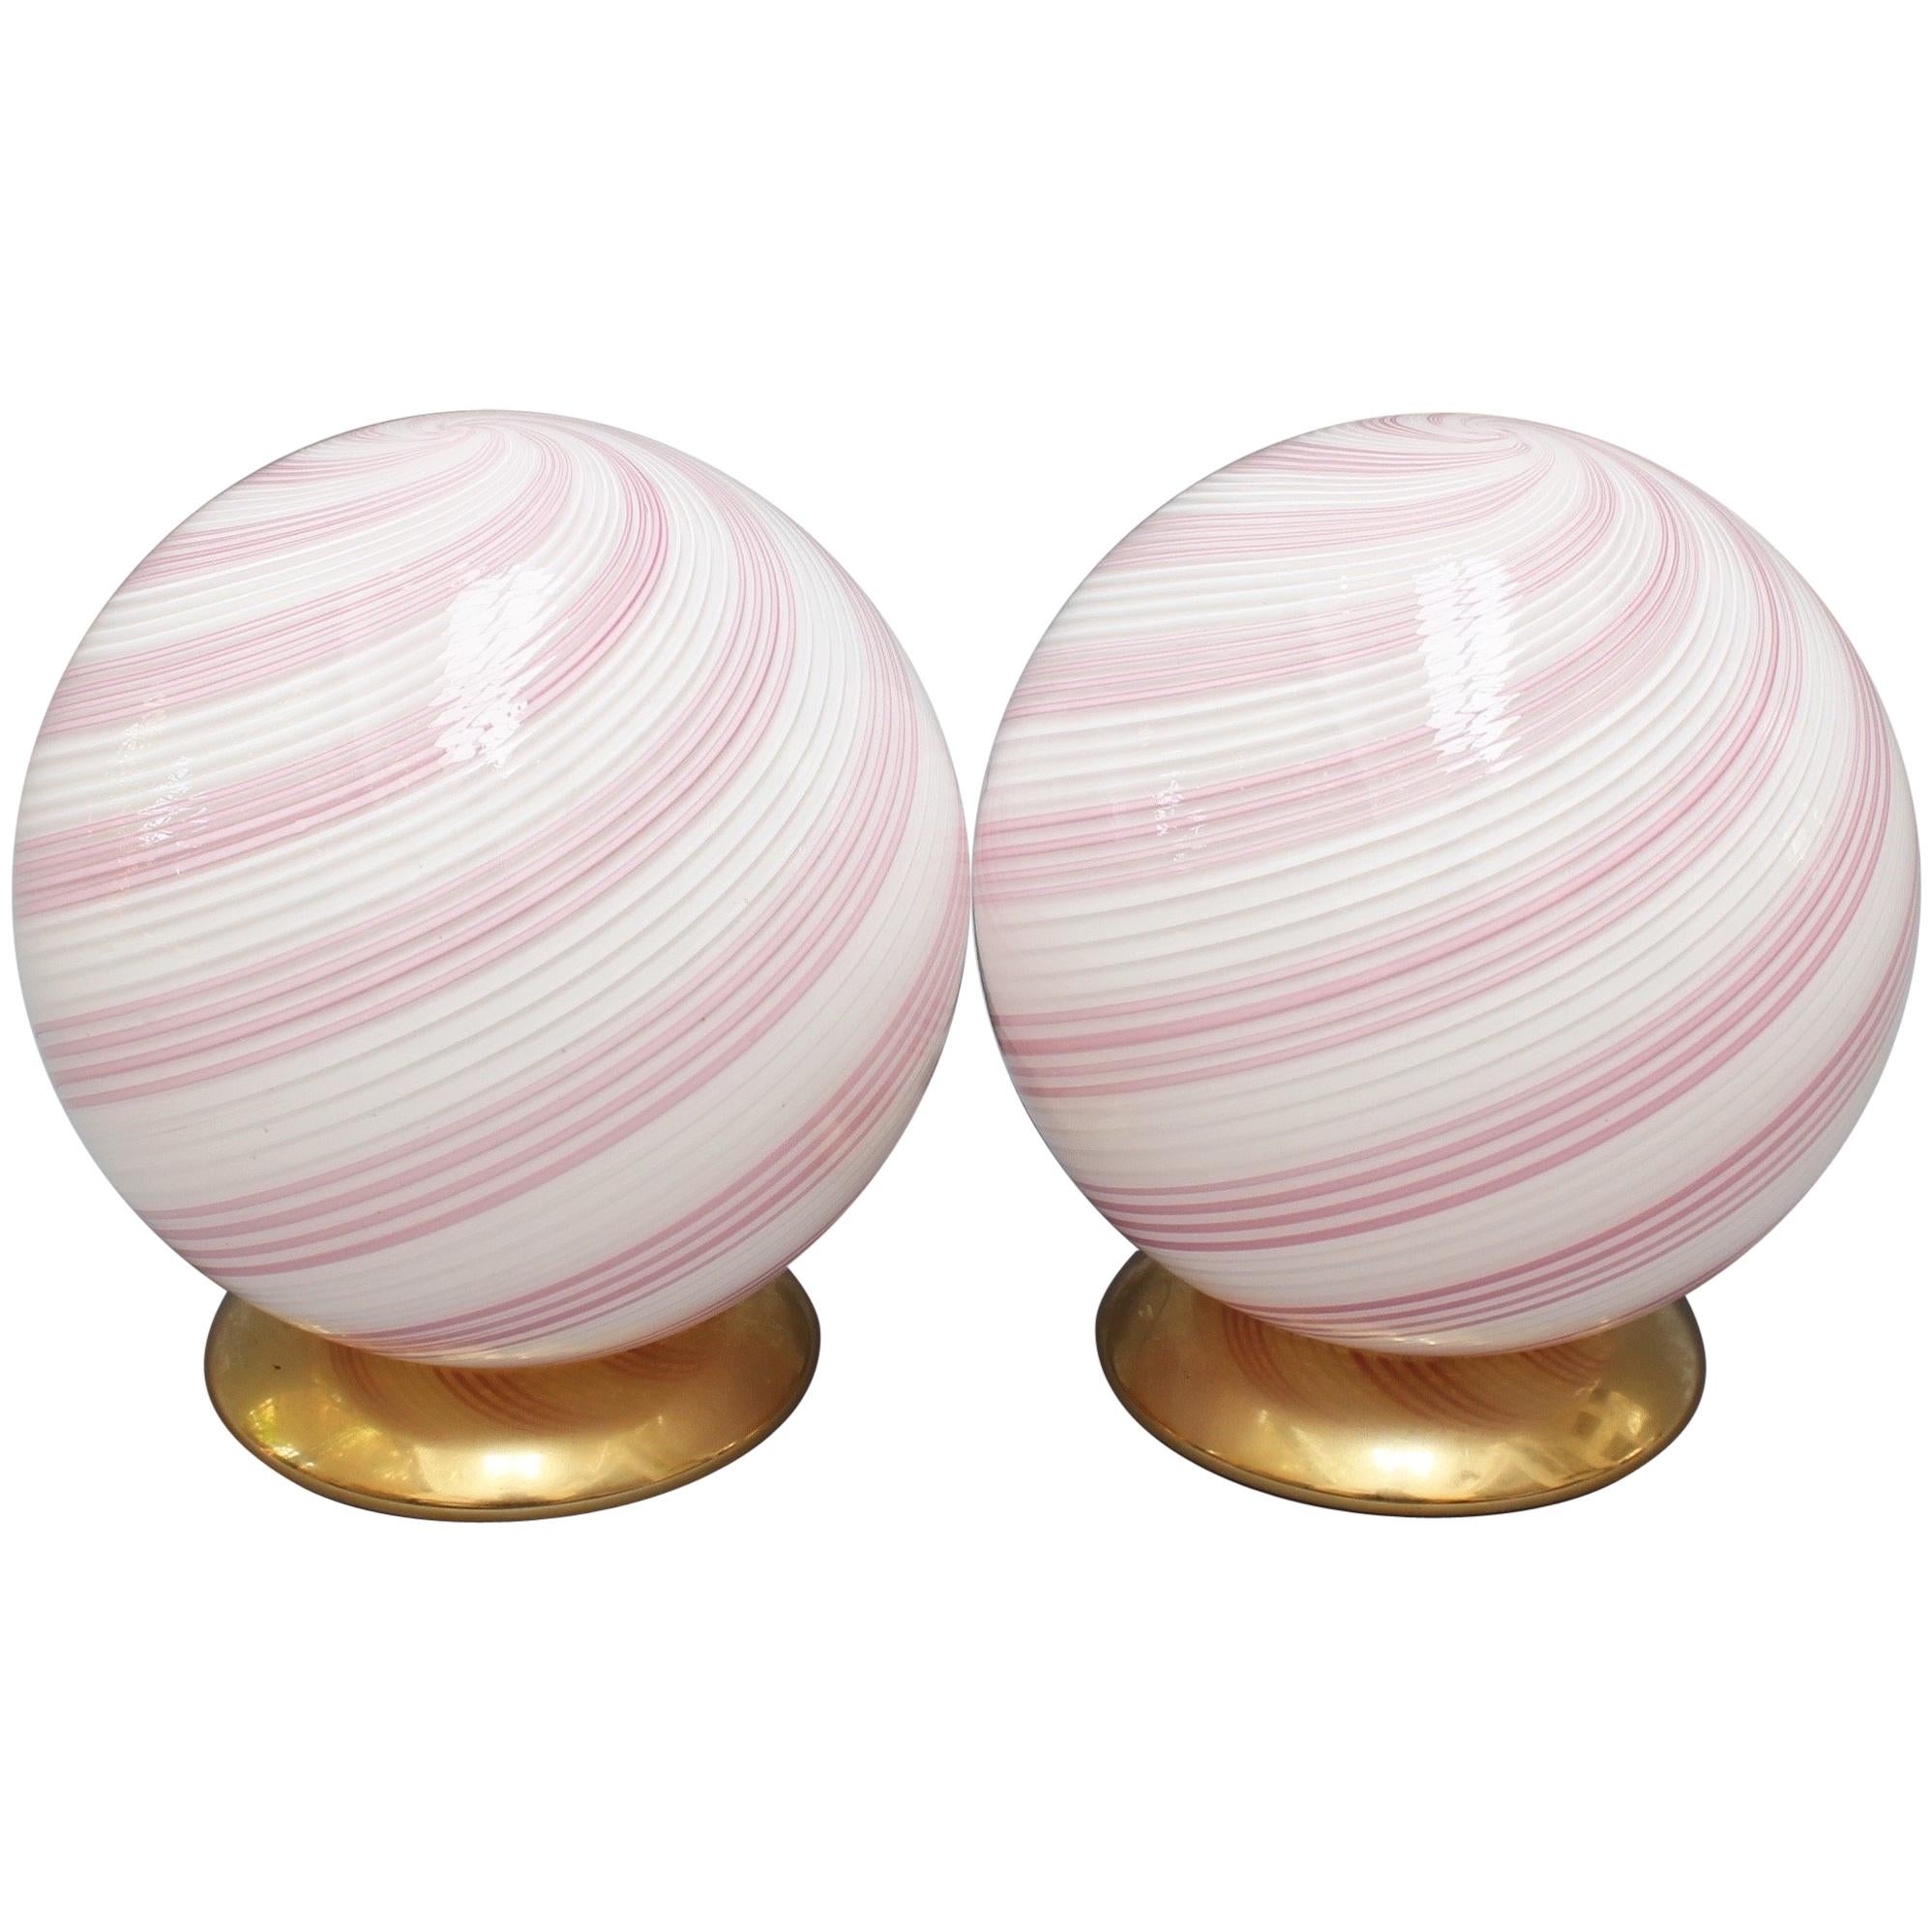 Pair of Pink Murano Glass Globe Table Lamps, circa 1960s